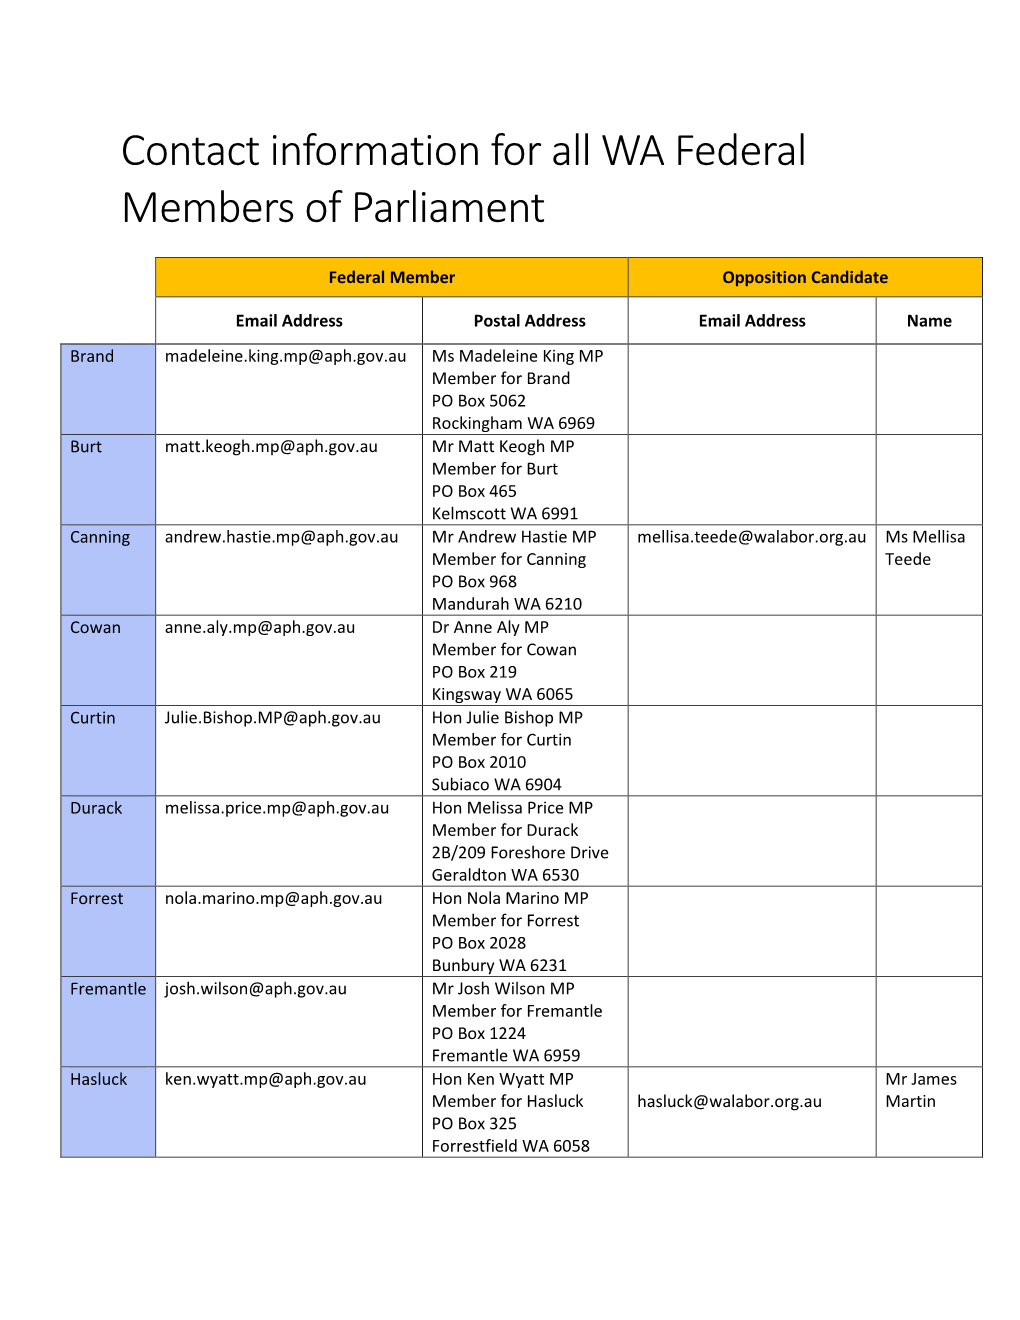 Contact Information for All WA Federal Members of Parliament